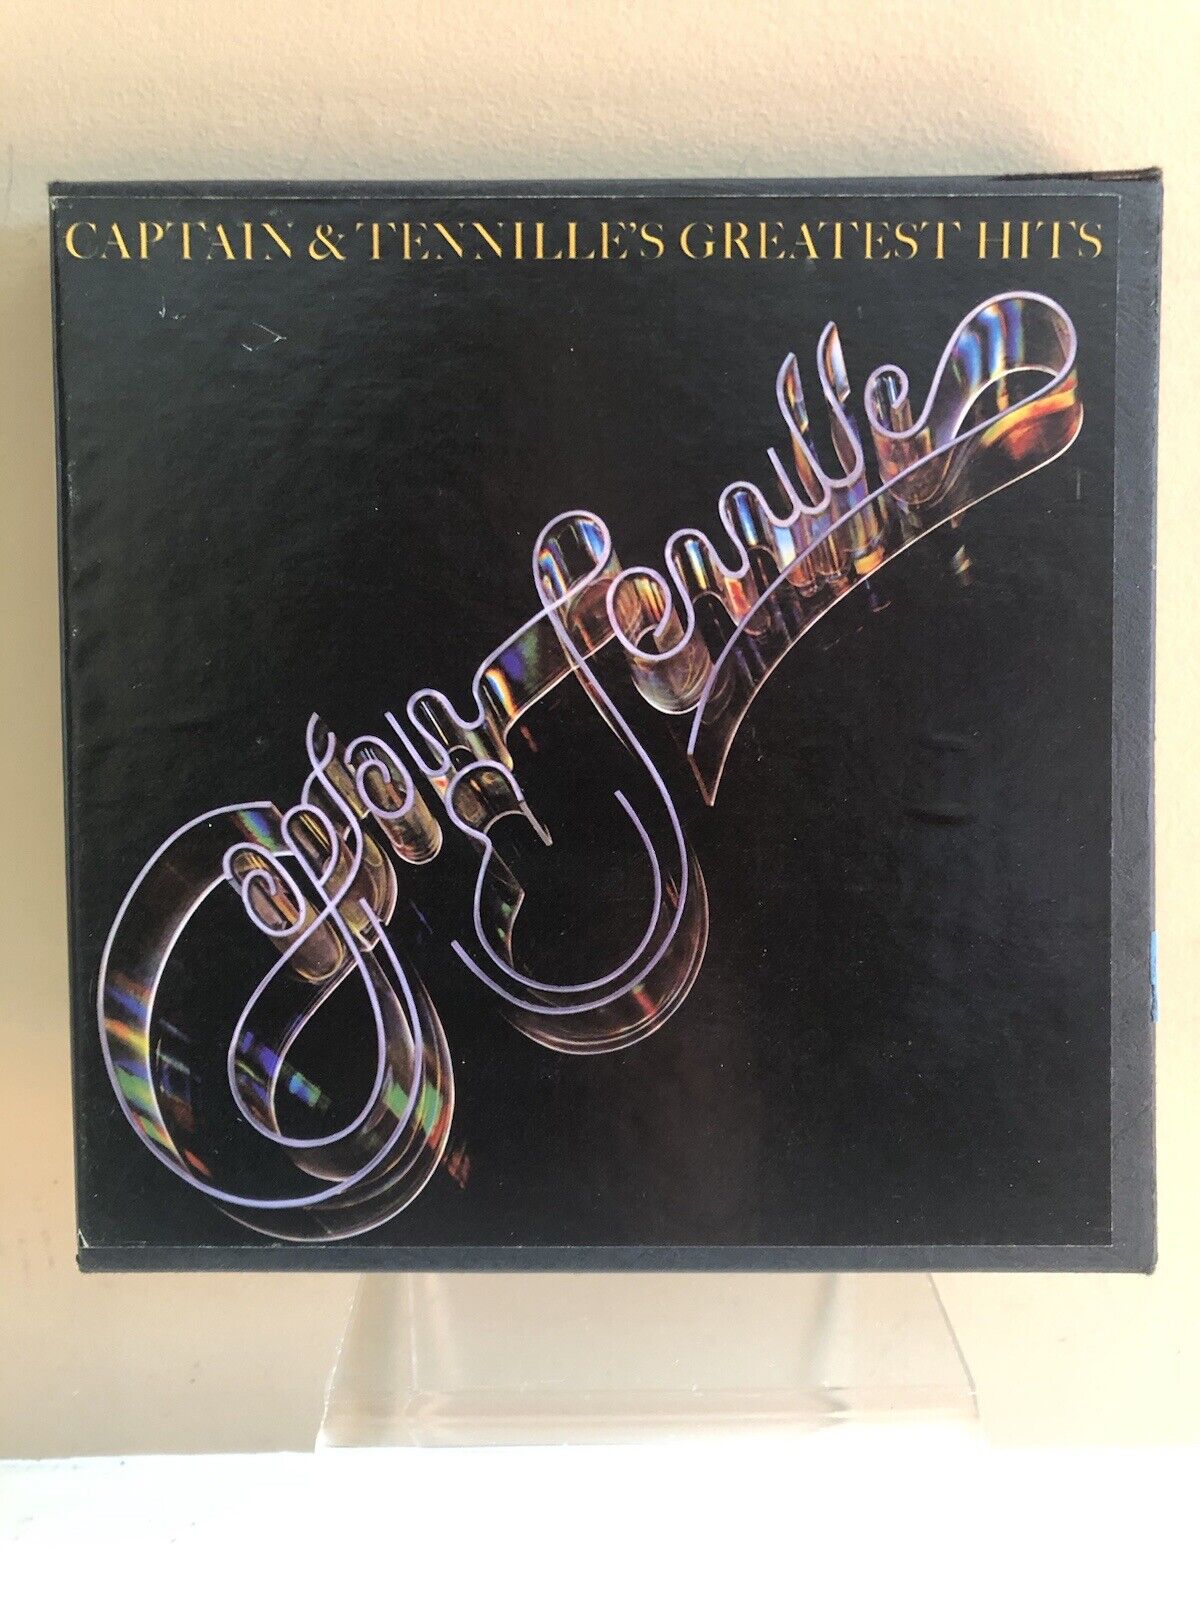 Captain & Tennille’s Greatest Hits-Reel-to-Reel Tape 4 Track 3 3/4 IPS-Untested